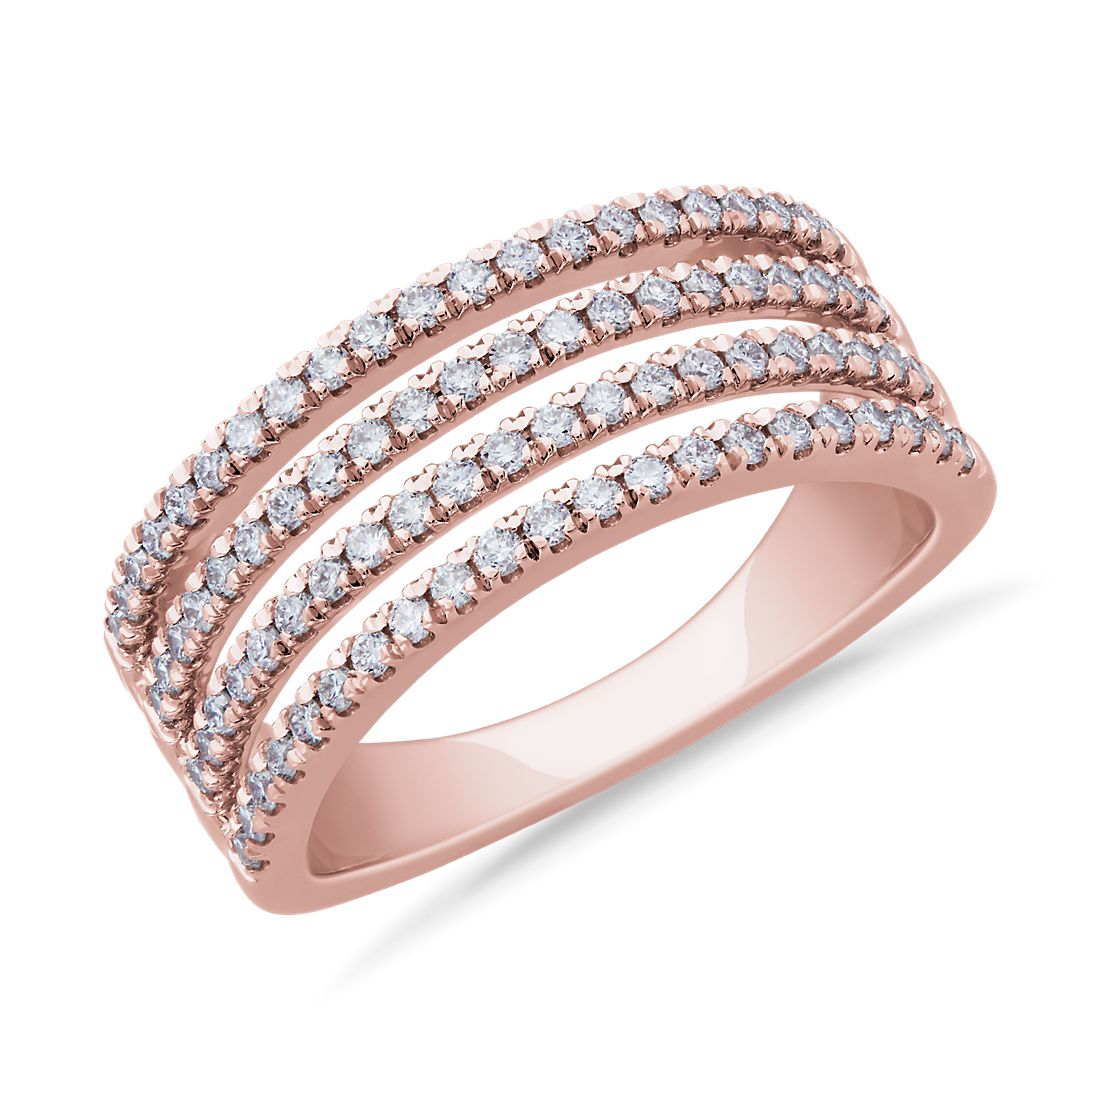 Quad Stacked Diamond Pavé Ring in 14k Rose Gold (0.47 ct. tw.)